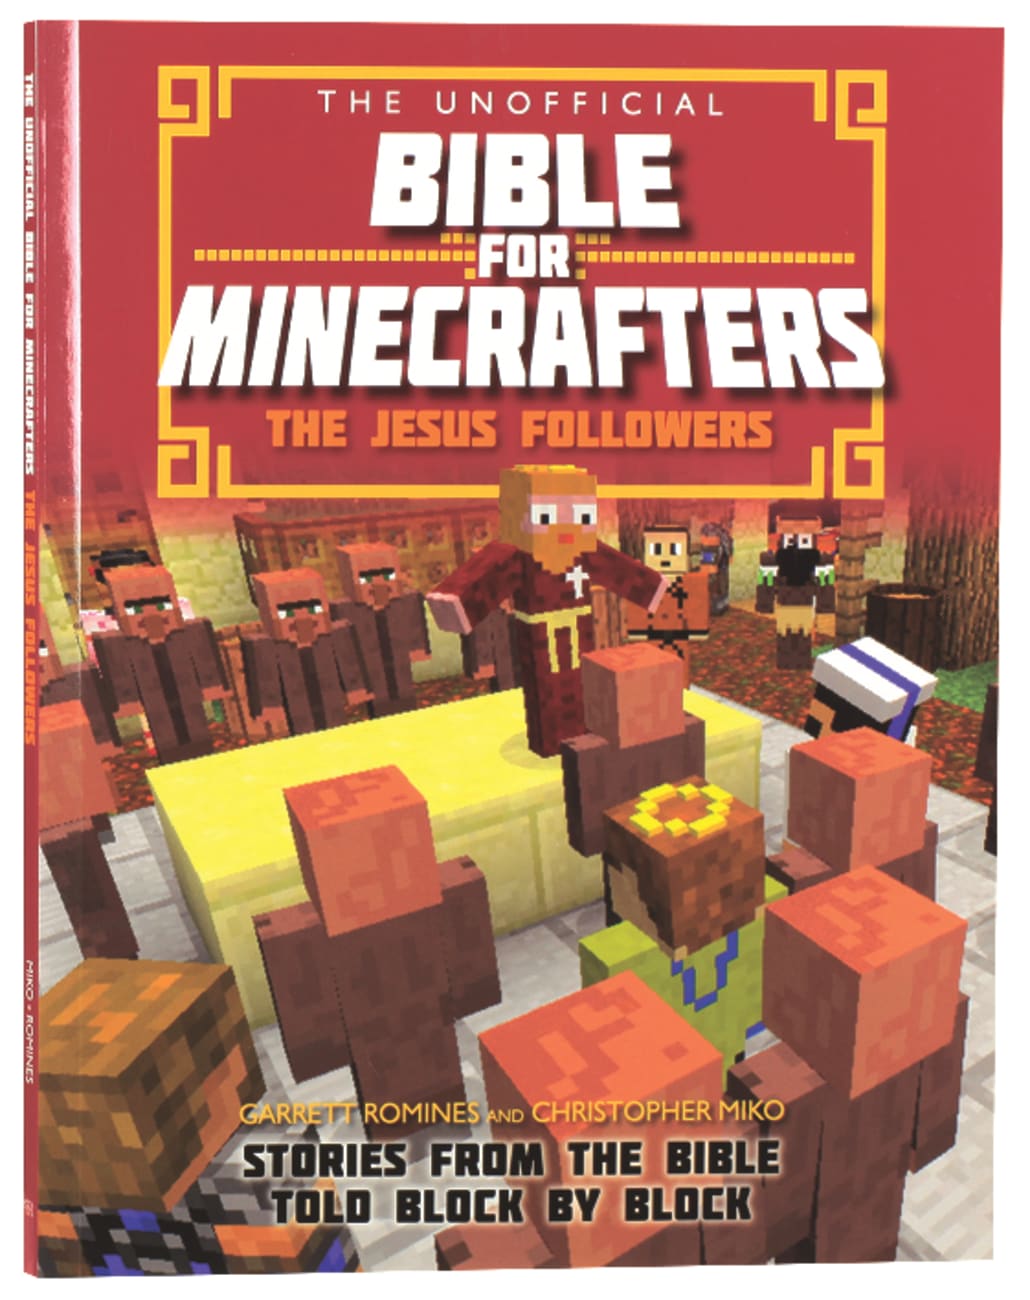 UNOFFICIAL BIBLE FOR MINECRAFTERS: THE JESUS FOLLOWERS